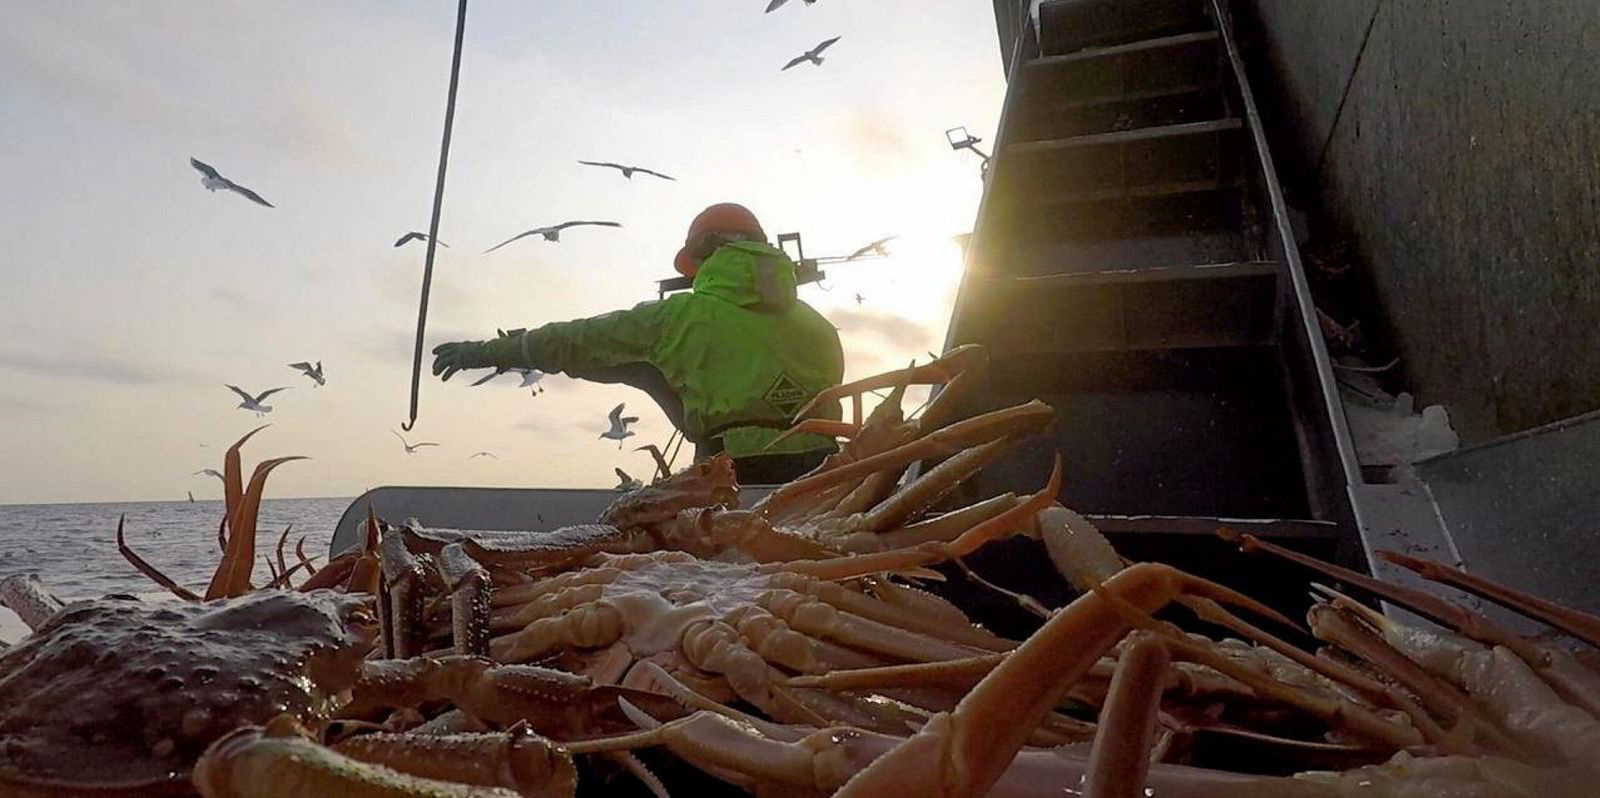 With few alternatives, fears grow that Russia's crab harvesters may suspend  fishing over export bans